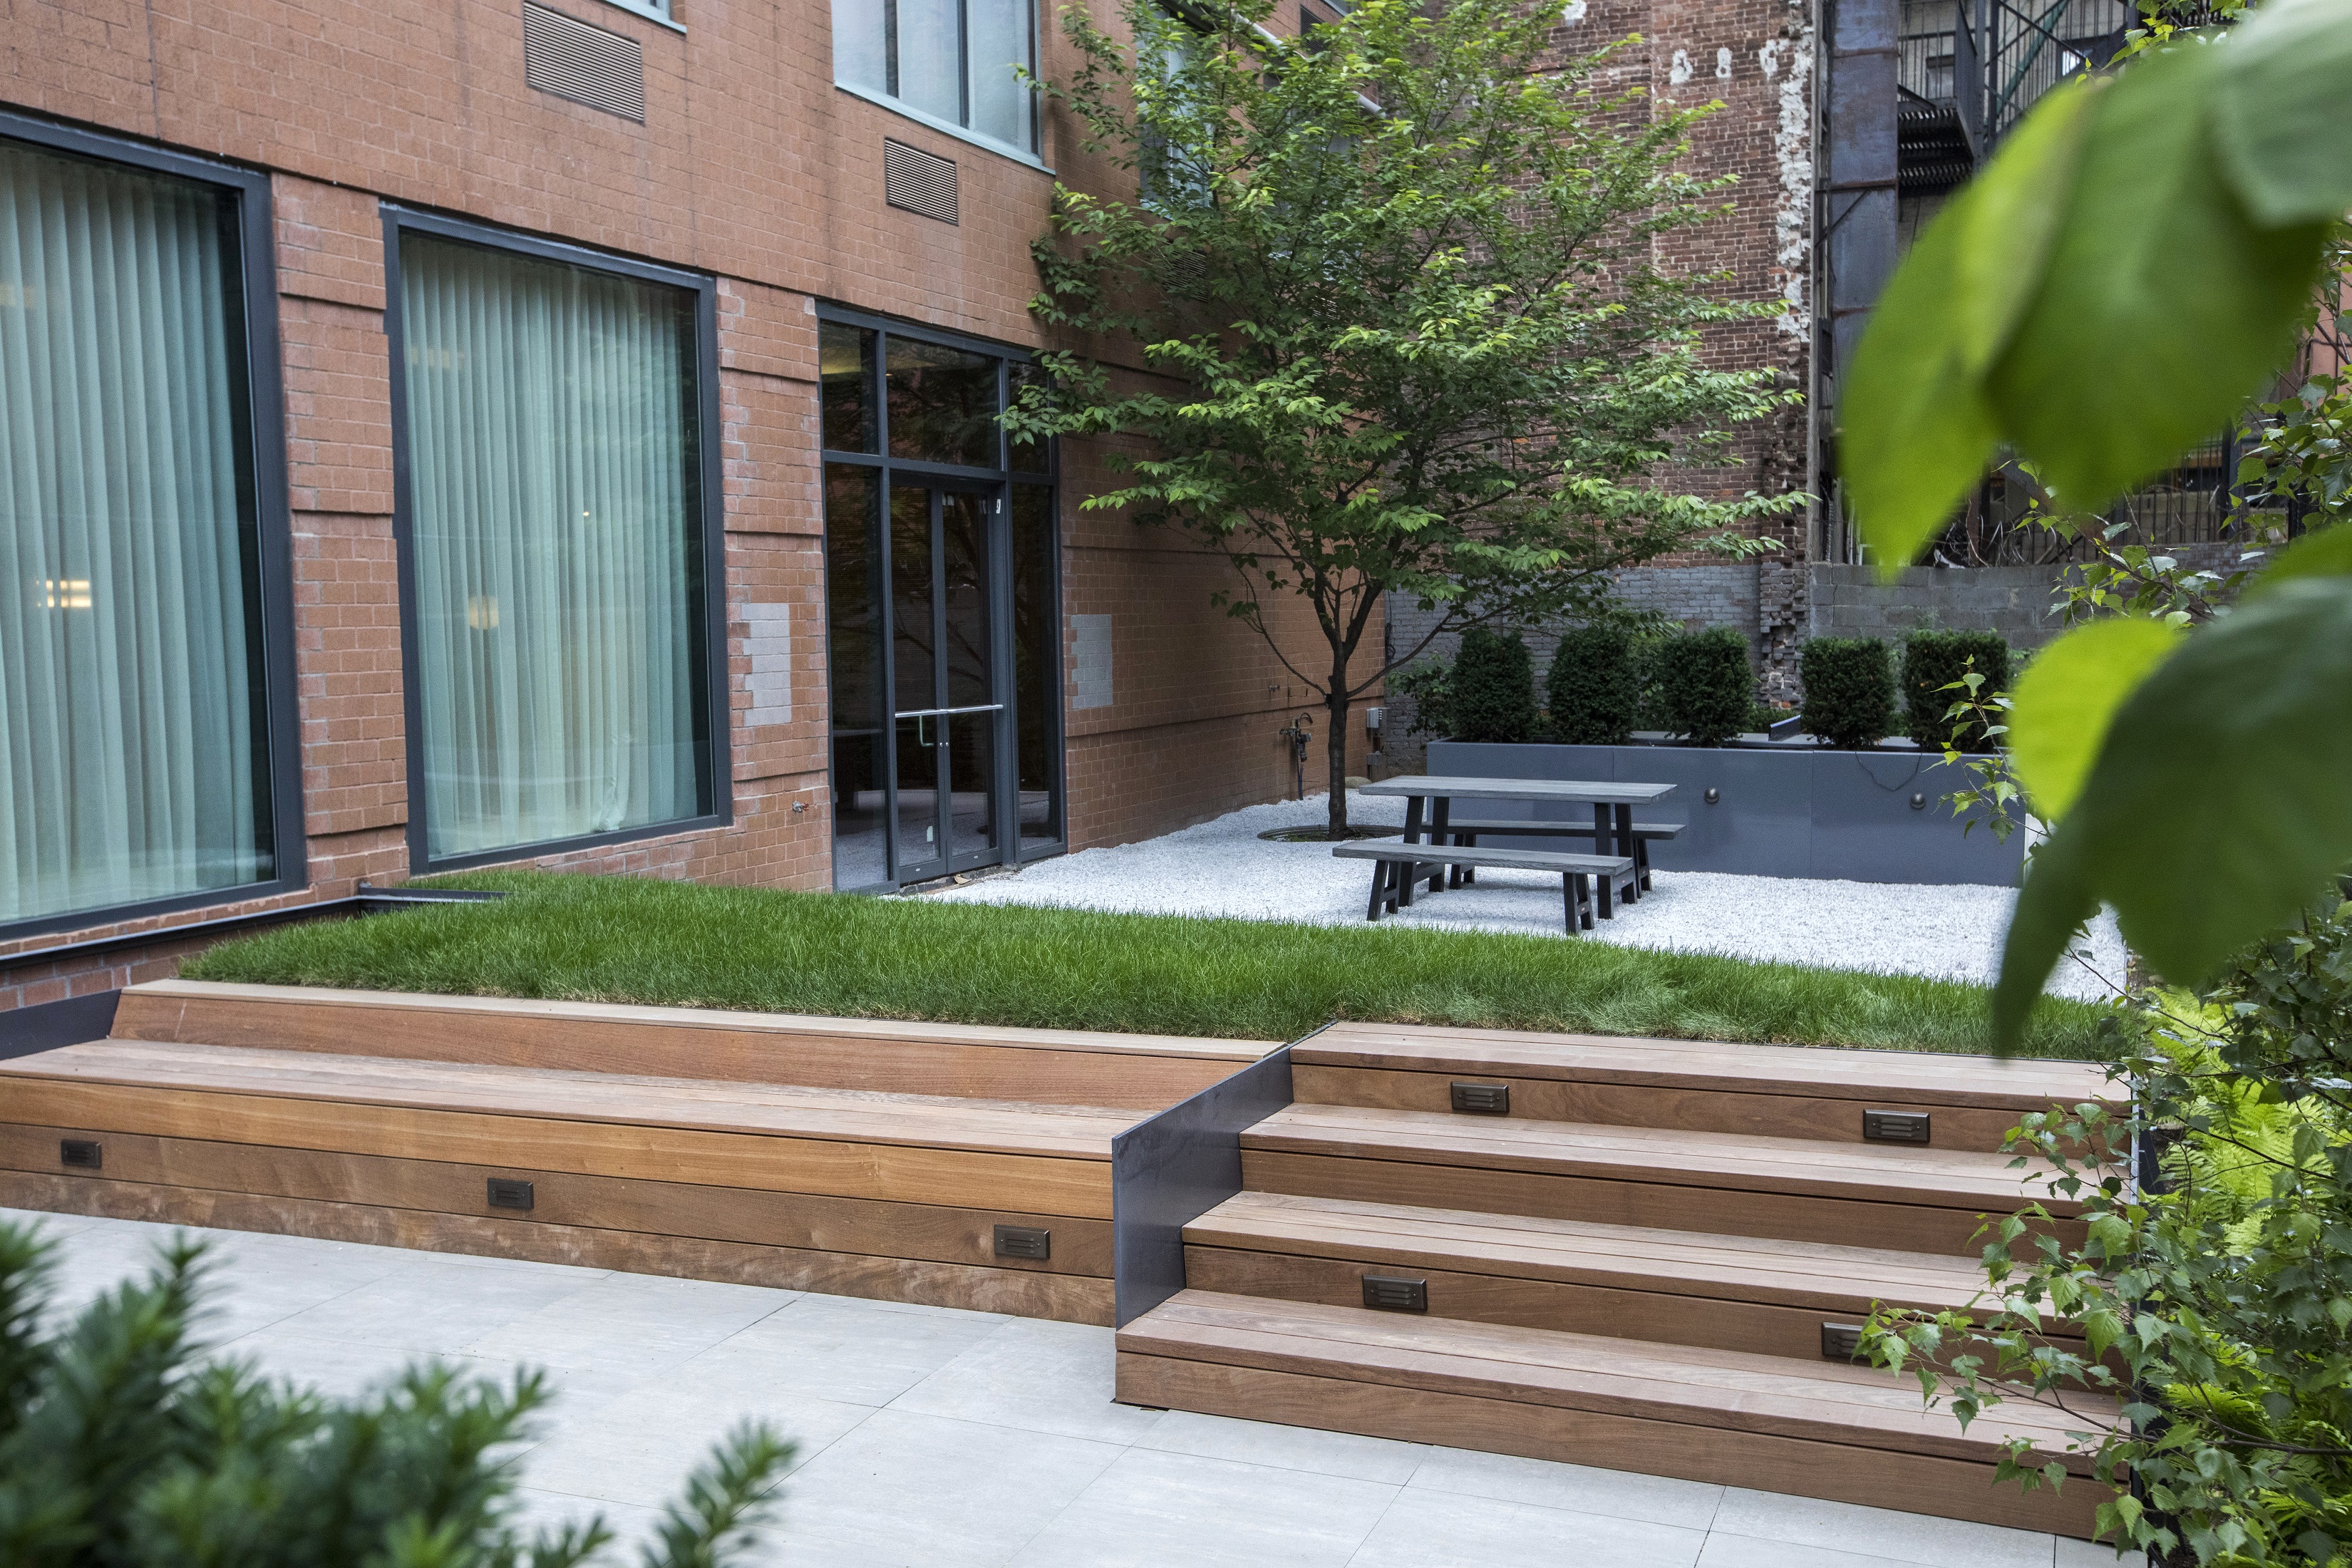 A quite break with a side of fresh air is delivered through this refined courtyard.